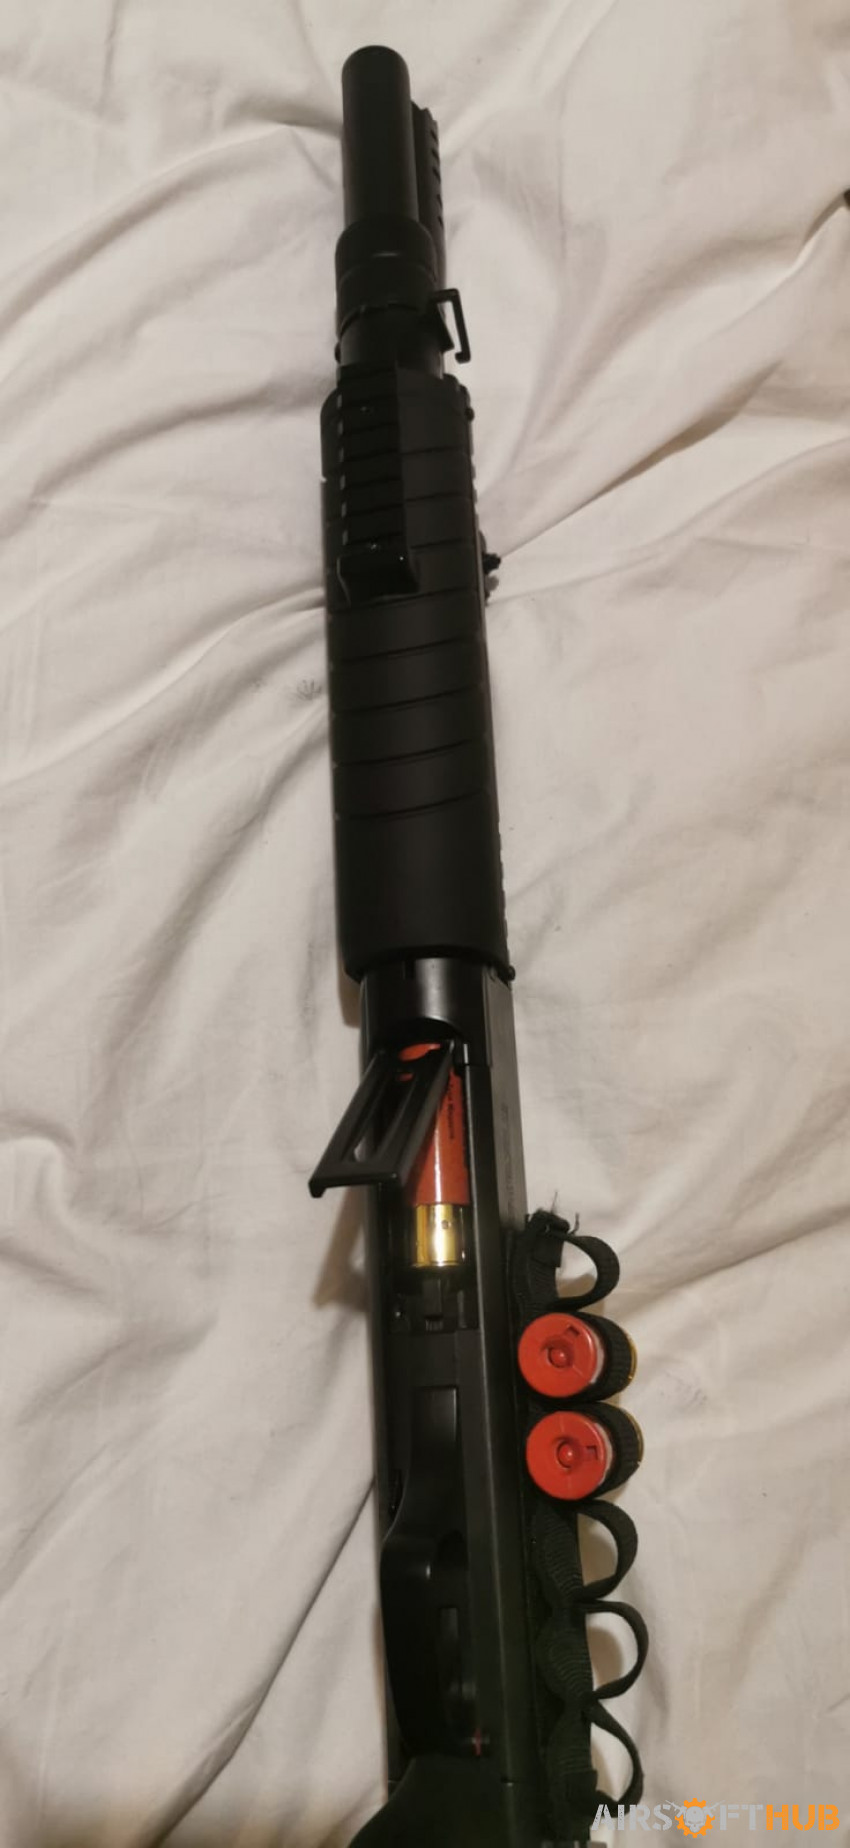 Moving to hpa - Used airsoft equipment